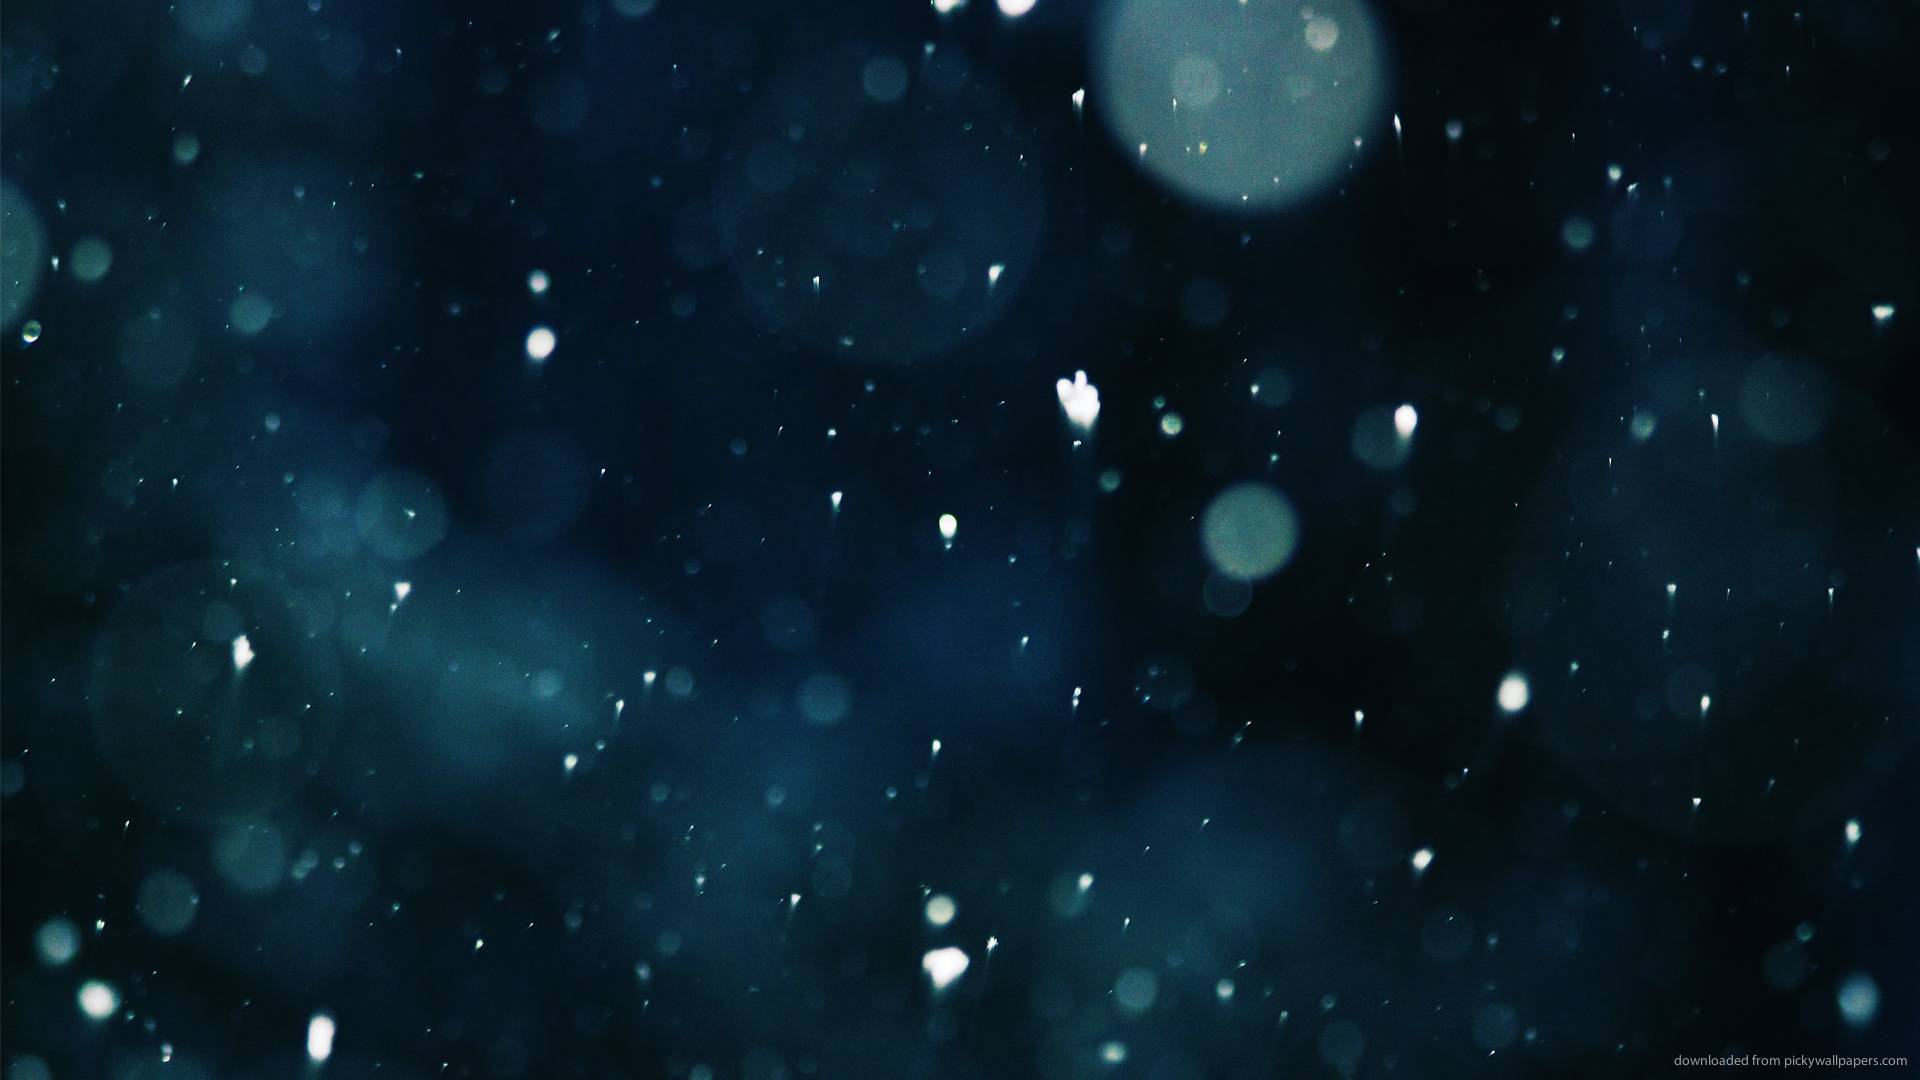 Dark Blue Wallpapers 1920×1080 Download 1920×1080 Snowflakes In A